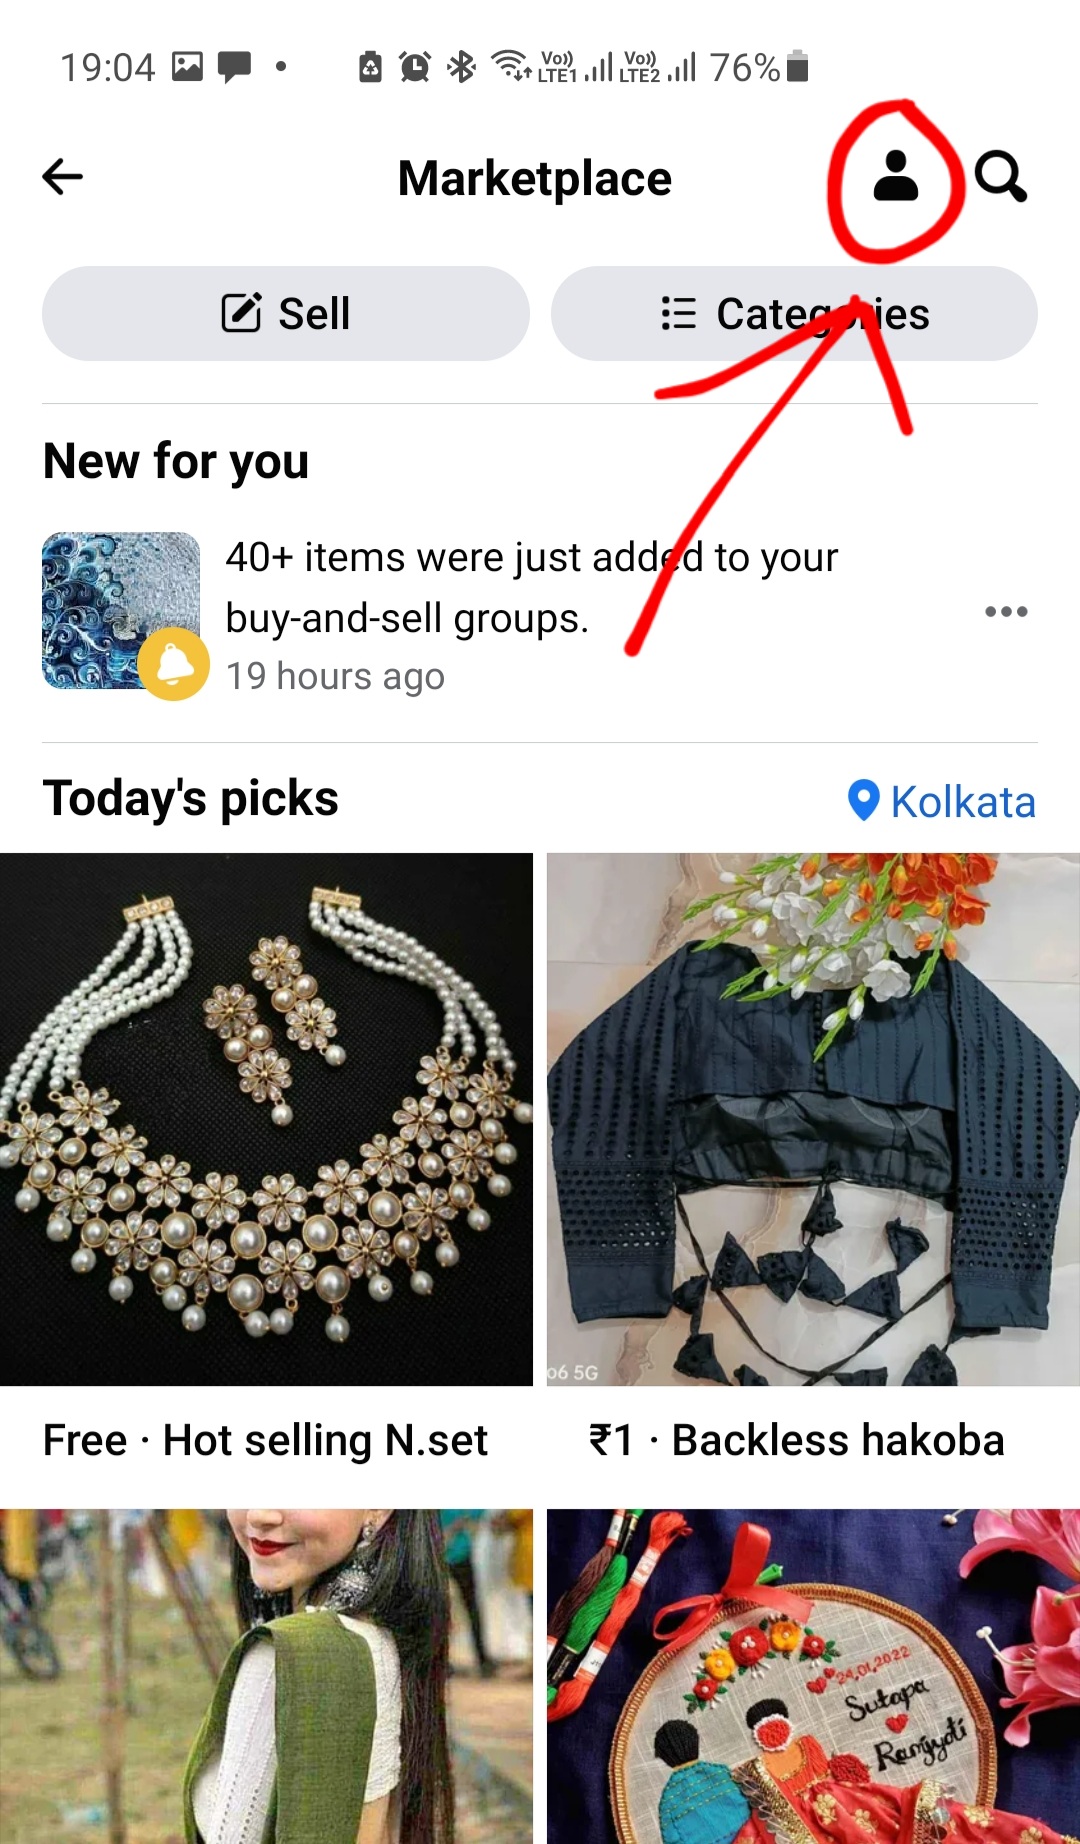 How To Hide Your Facebook Marketplace Listings From Your Friends?